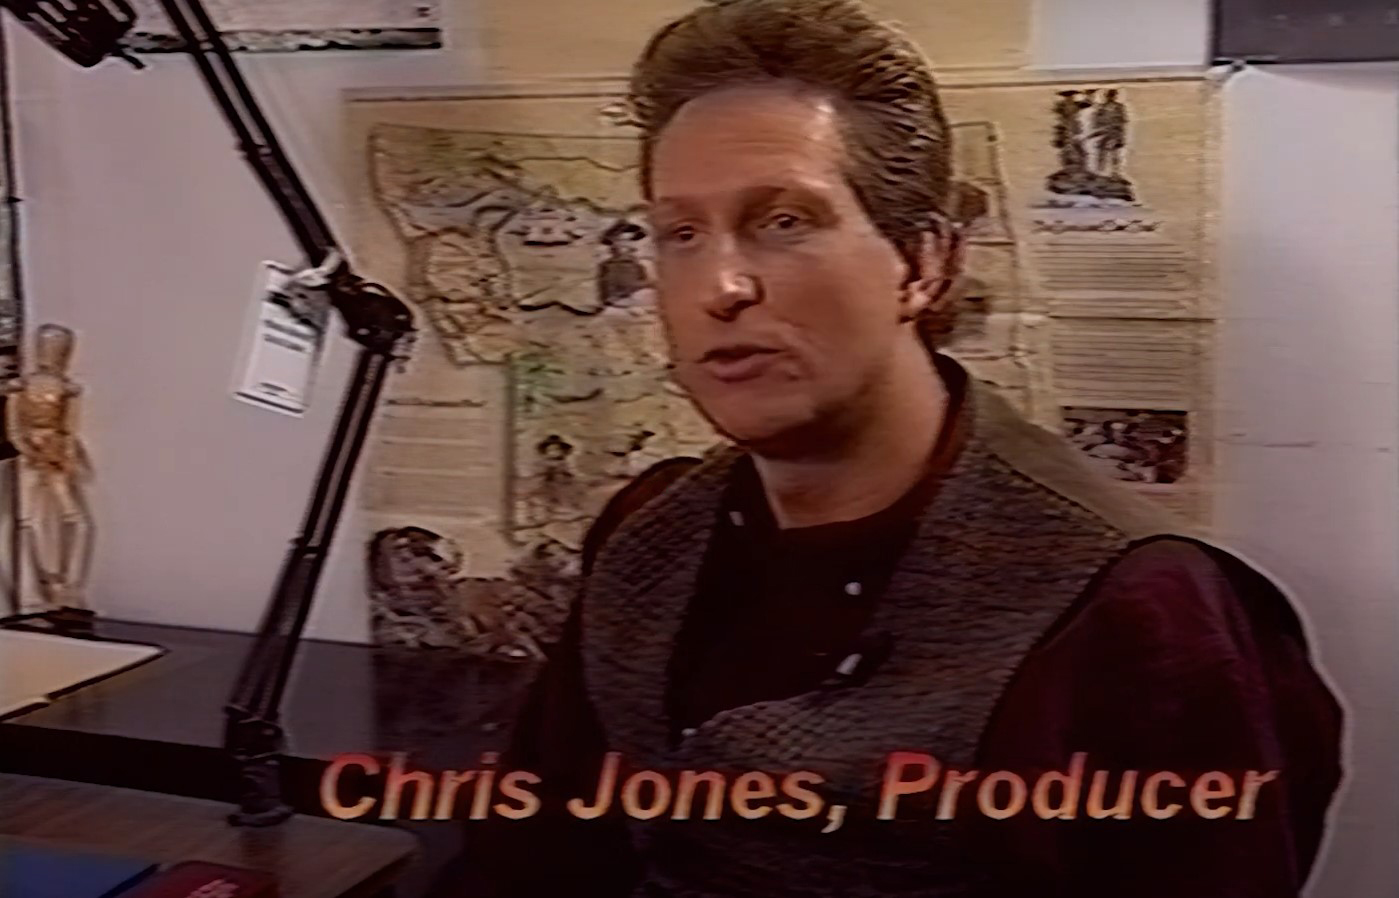 Image of a younger Chris Jones as he talks about computer technology in the making of The Pandora Directive short documentary video made during the original release of The Pandora Directive in 1996.